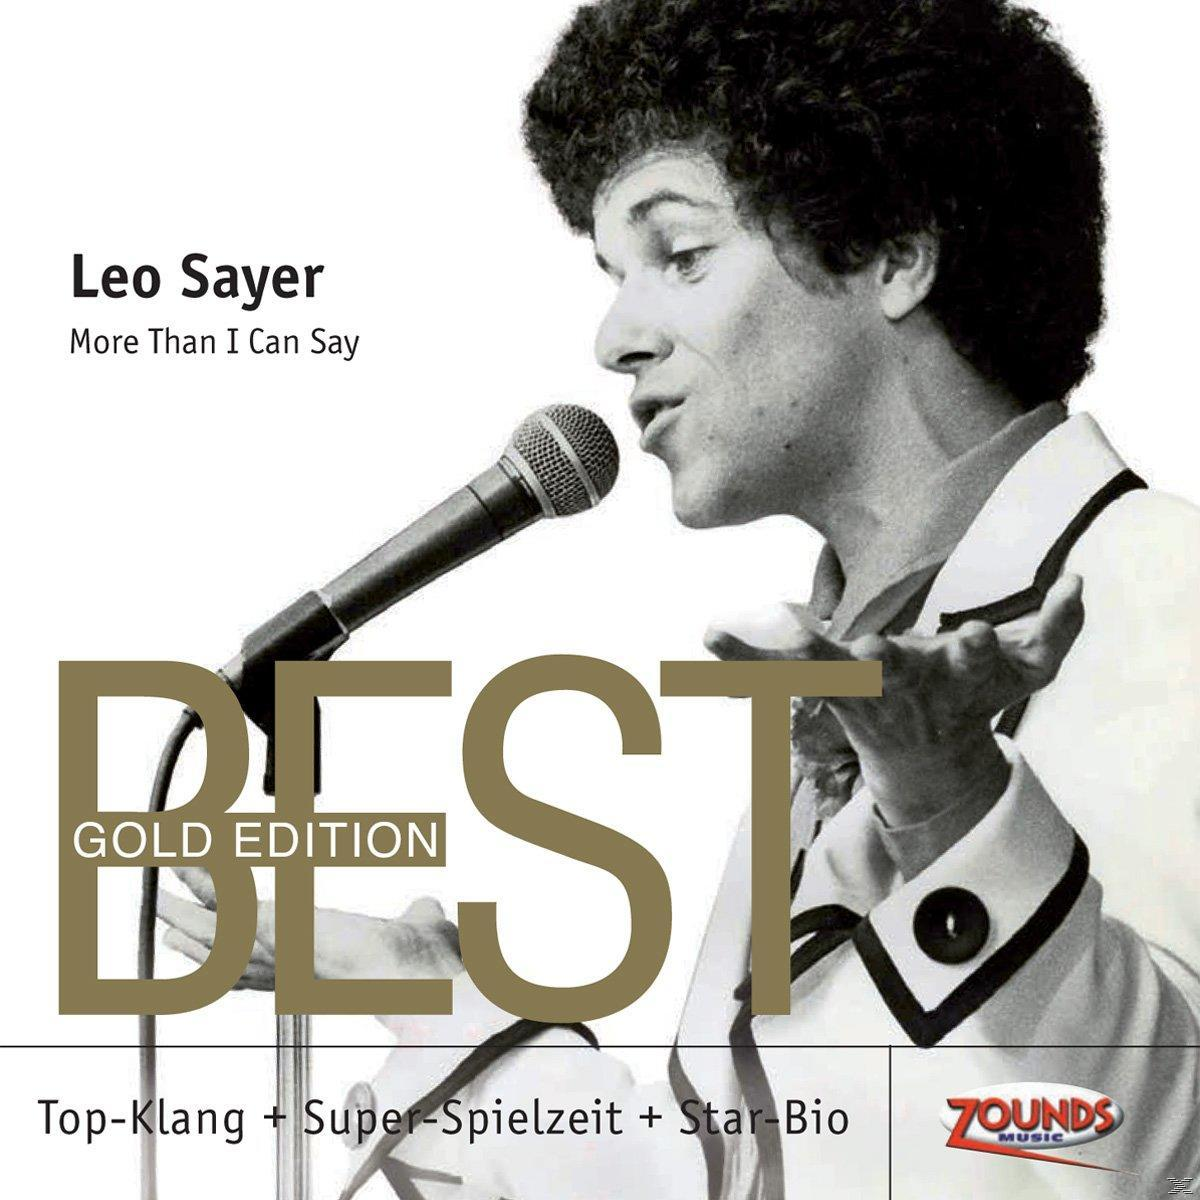 Leo Sayer - Say More Edition) I - Can (Gold (CD) Than